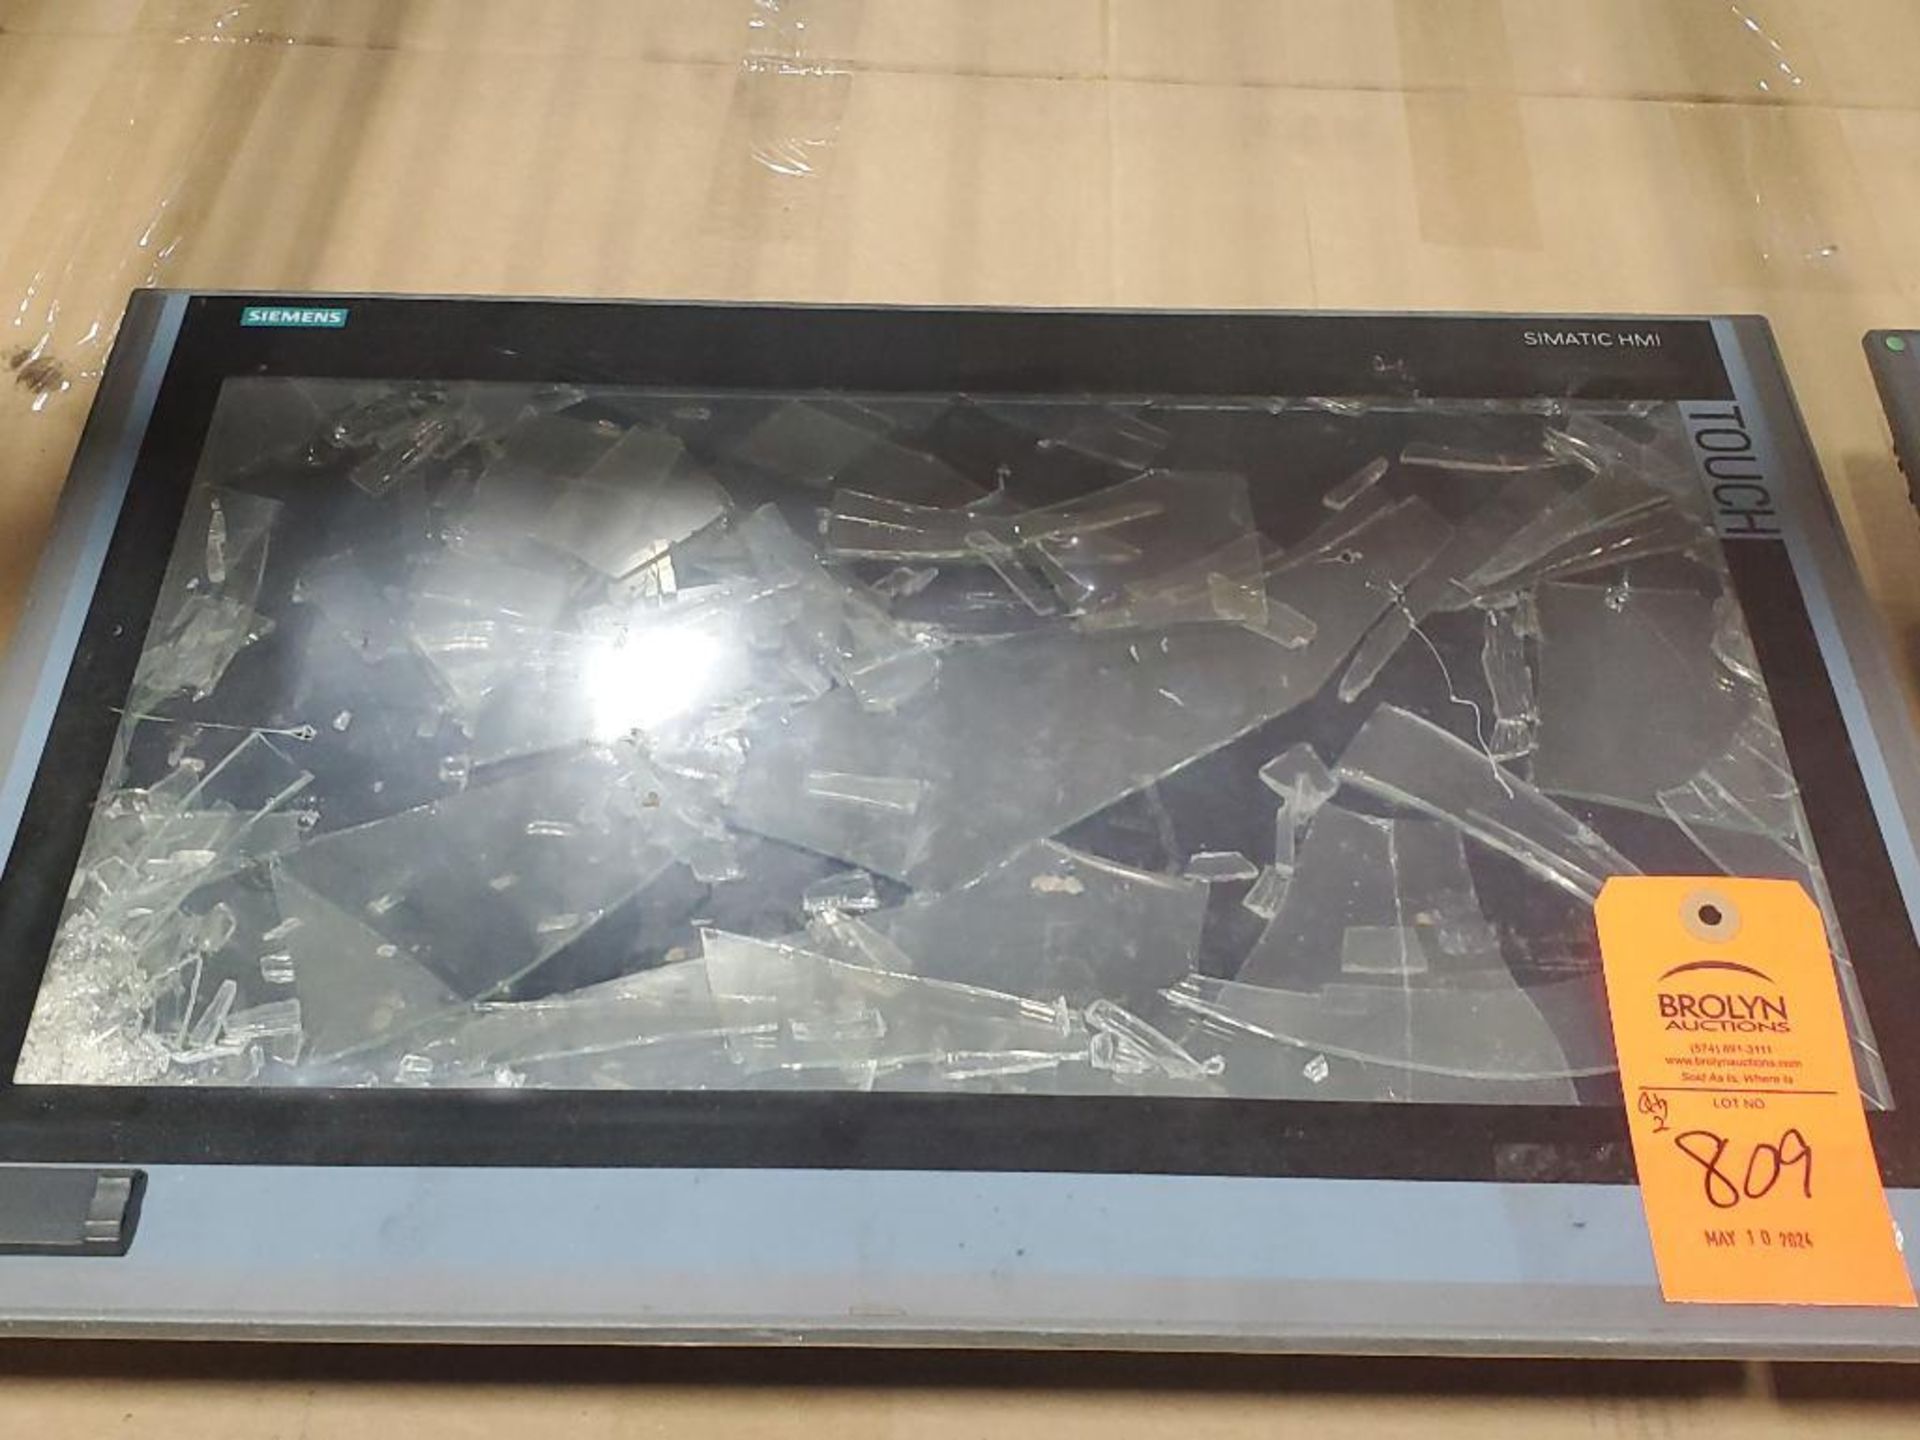 *Parts / Repairable* - Qty 2 - Siemens touch panels. - Image 3 of 10